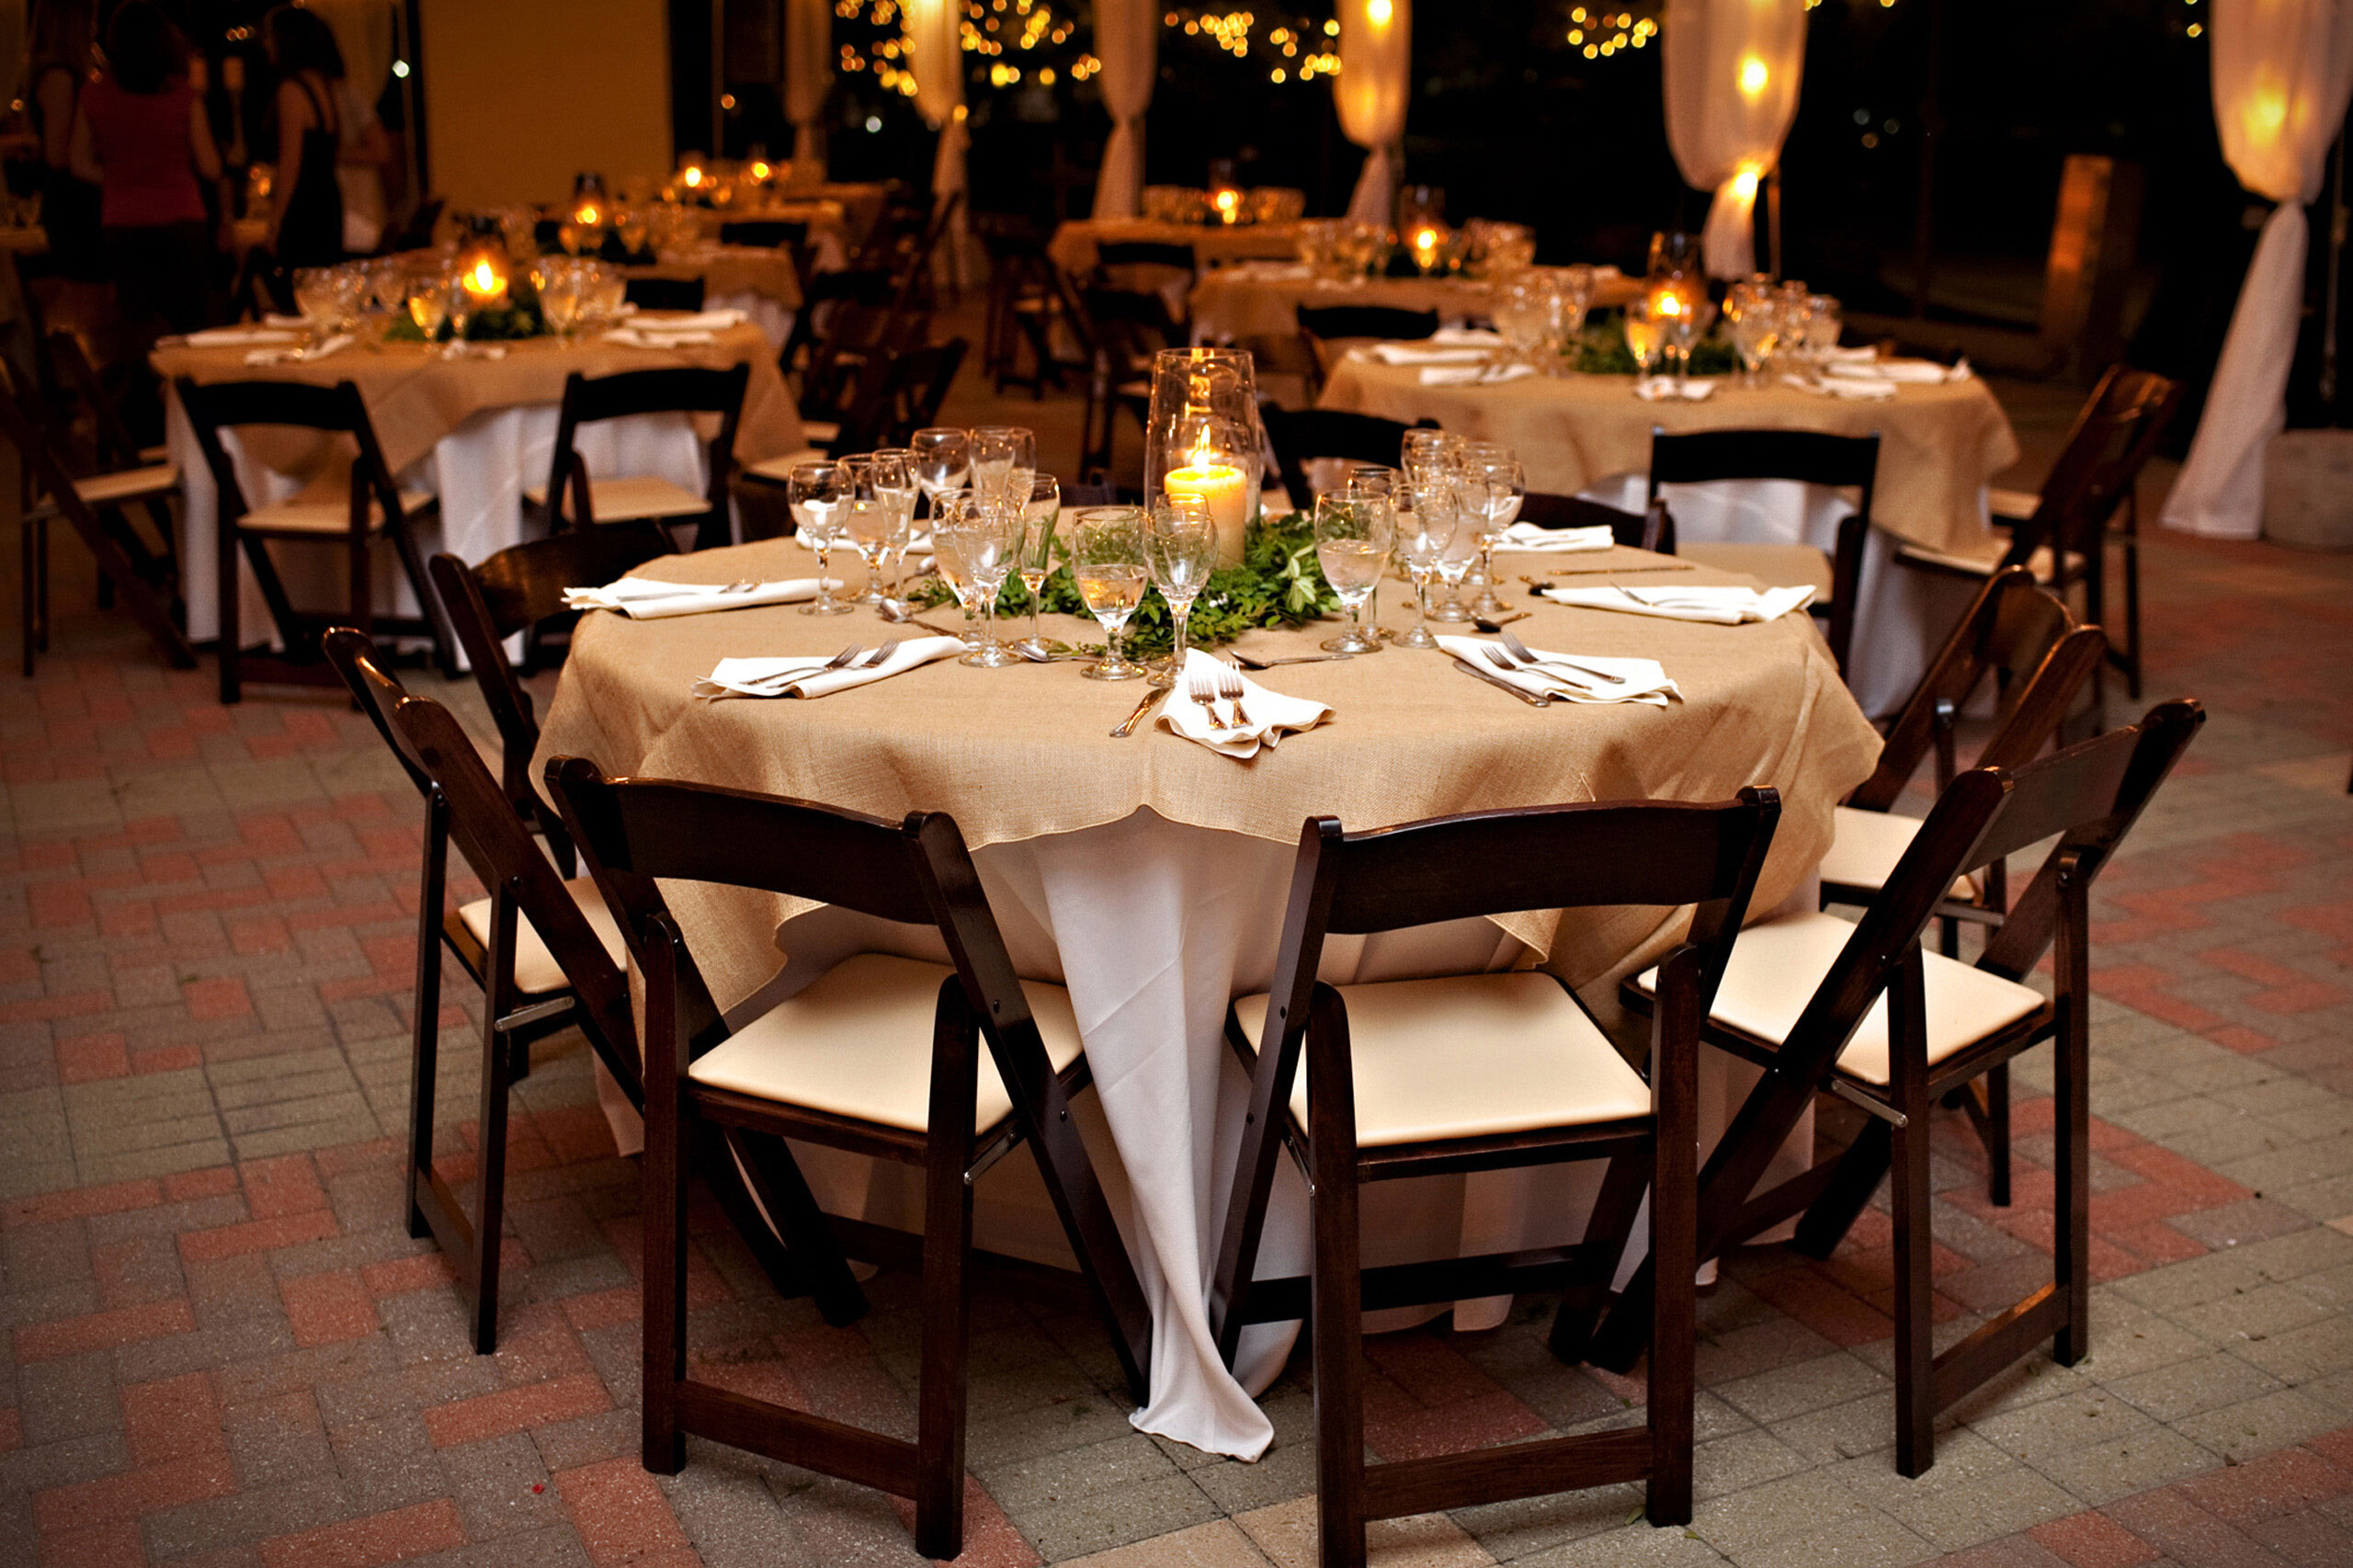 Candel lit tables and chairs set for a wedding dinner.